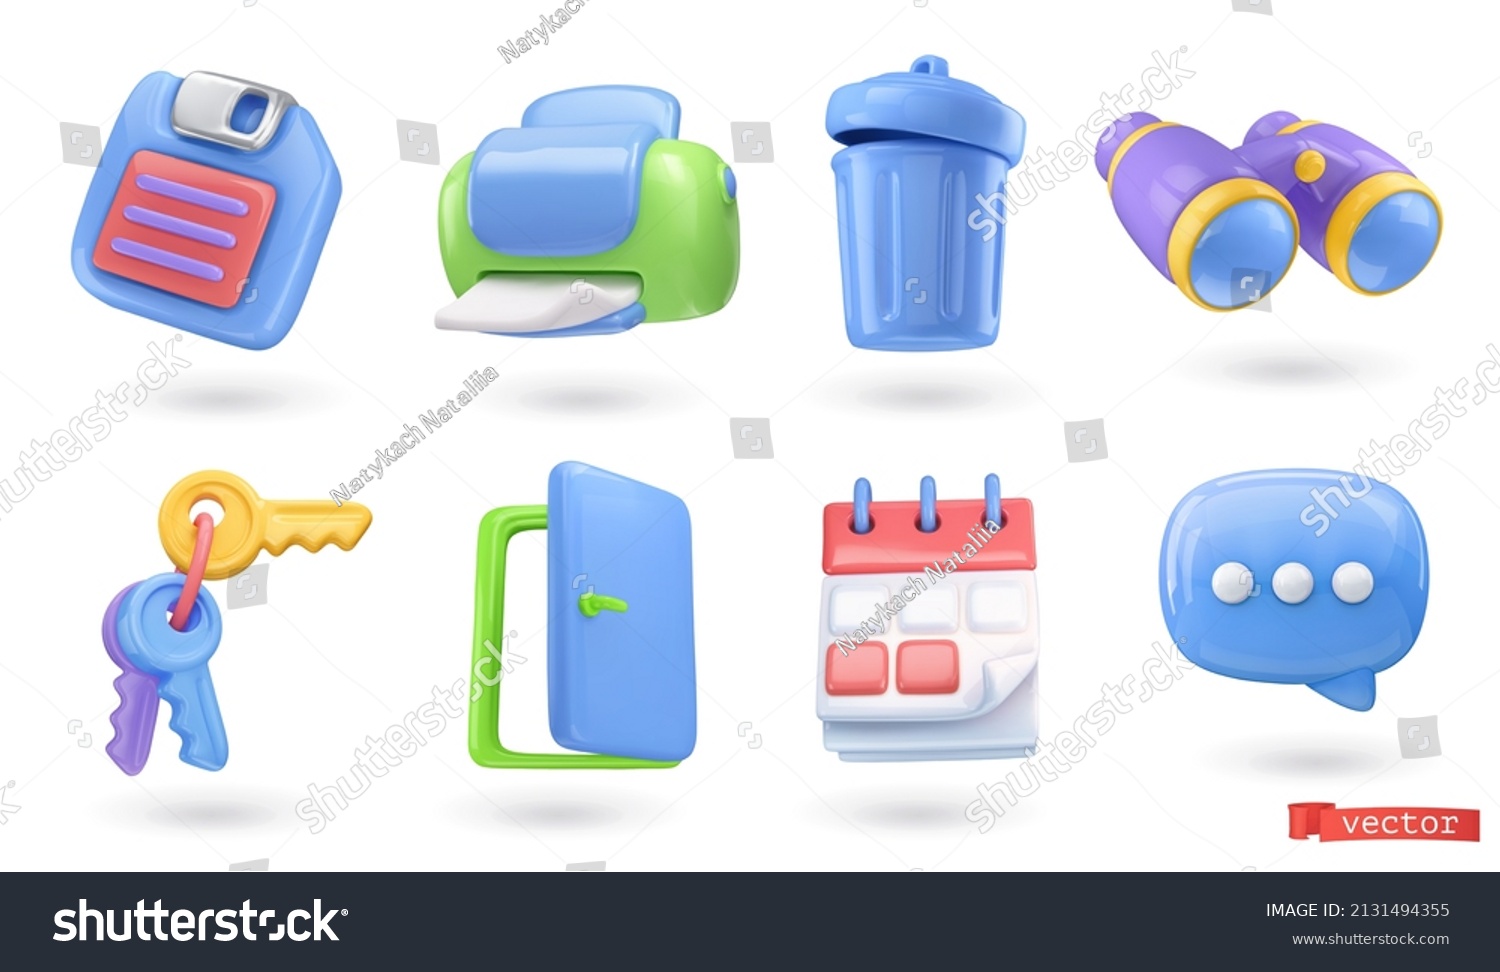 SVG of 3d icon set. Floppy disk, printer, trash can, binoculars, keys, door, calendar, chat icon. Realistic render vector, glossy plastic objects svg